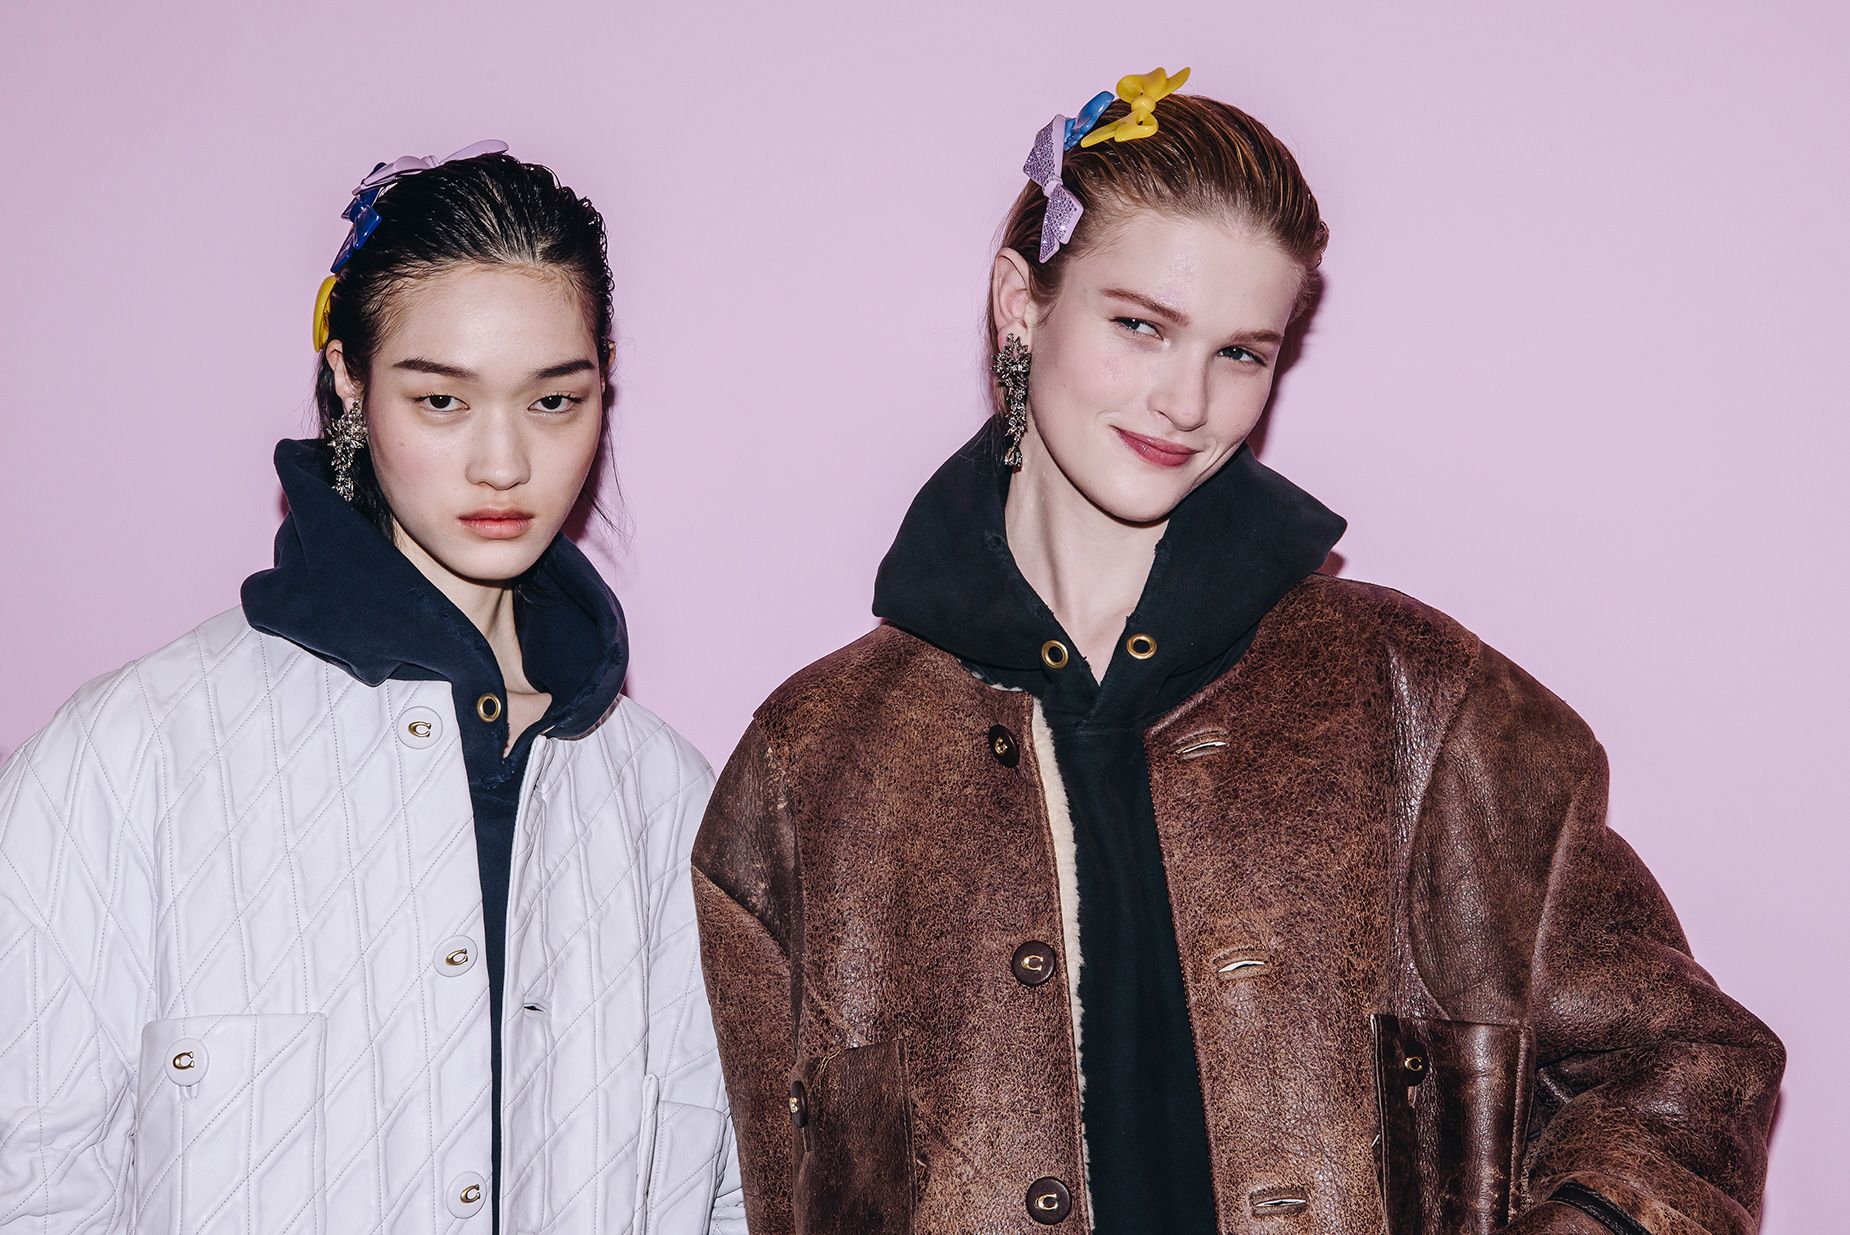 Coach has continued to cater to younger luxury buyers, this season offering distressed bomber jackets, collegiate hoodies and school blazers.